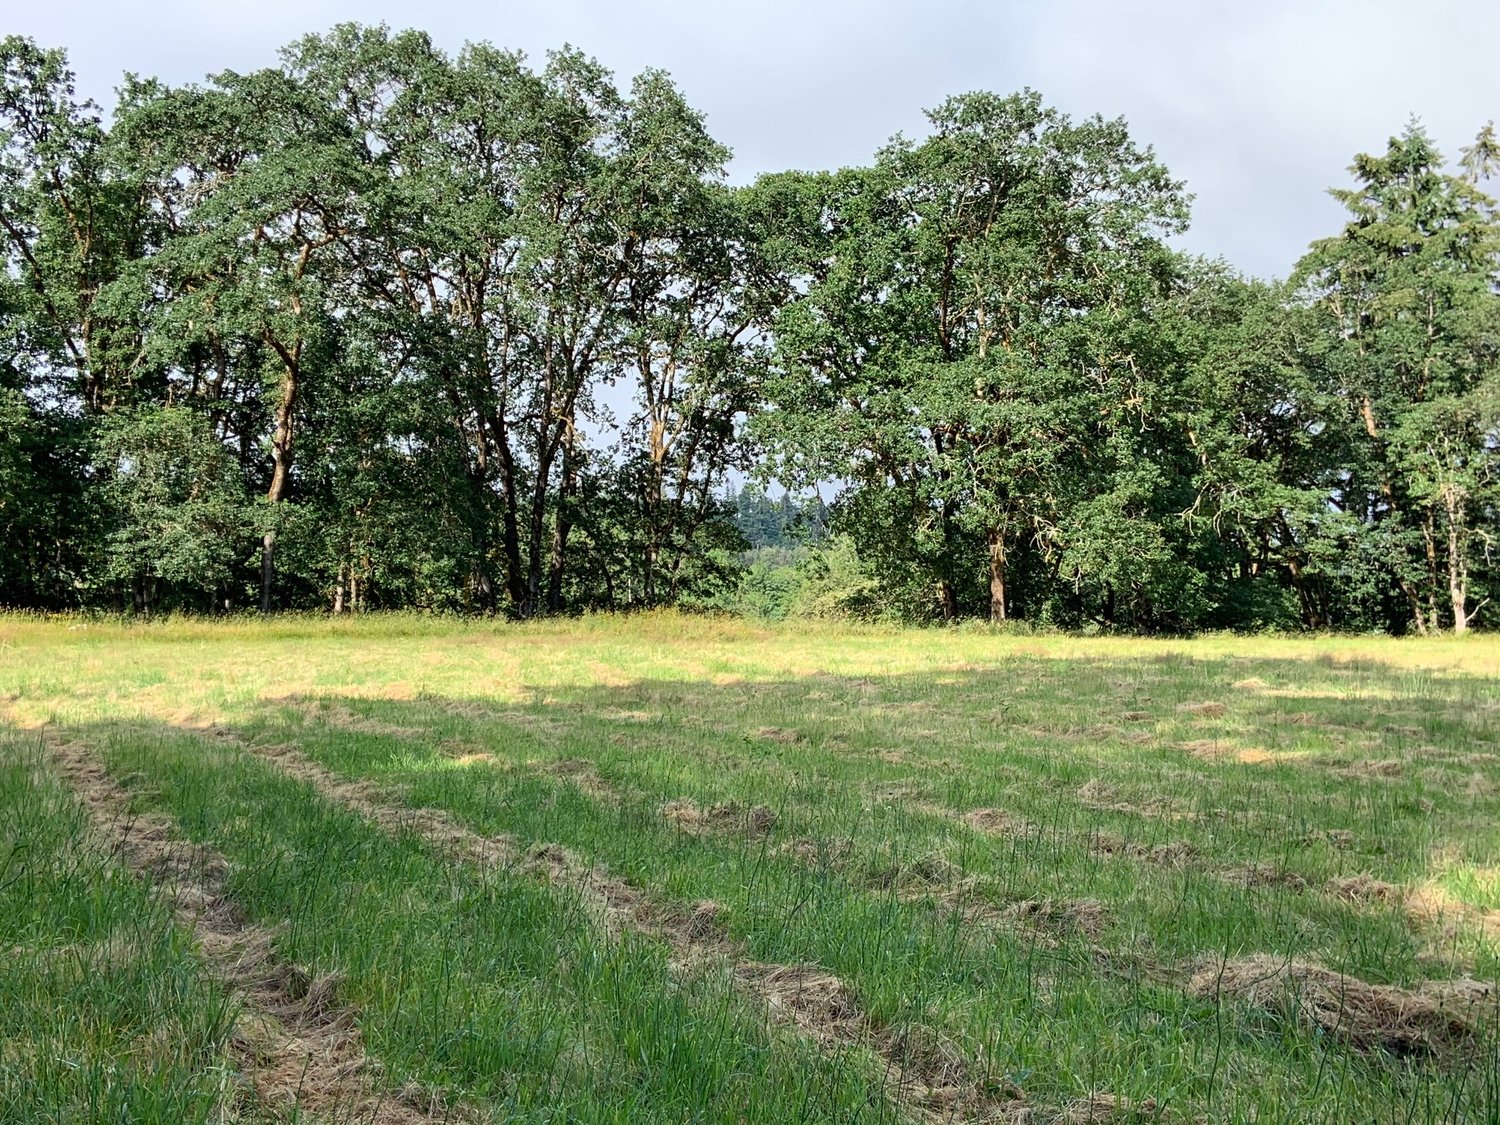 Oak tree grove on the historic James family 1852 pioneer farm, located south of Rochester.